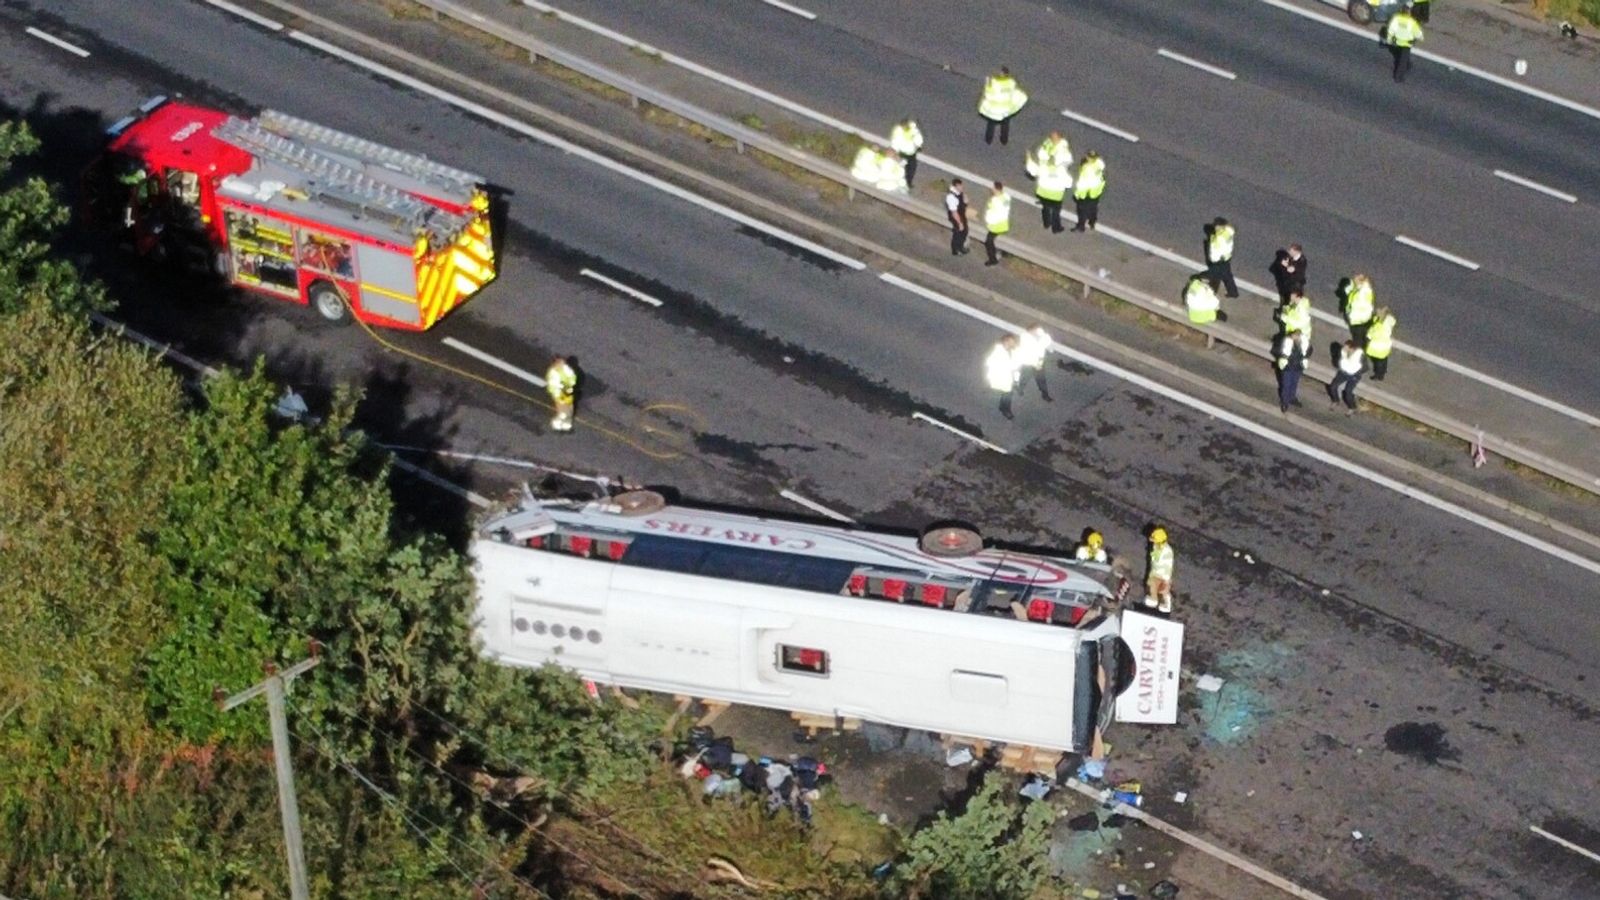 Merseyside: 'Major incident' as school bus overturns on M53 motorway with 'a number of casualties'